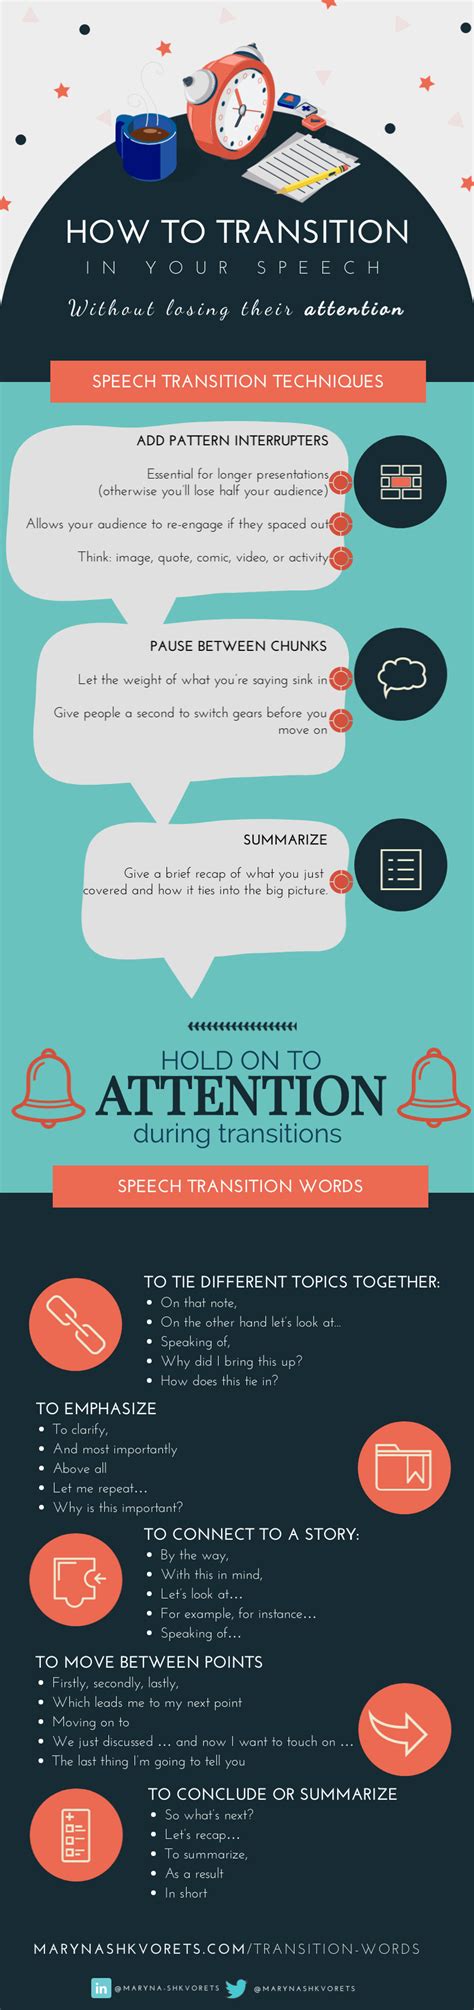 Transition Words How To Not Lose Your Audience During Speech